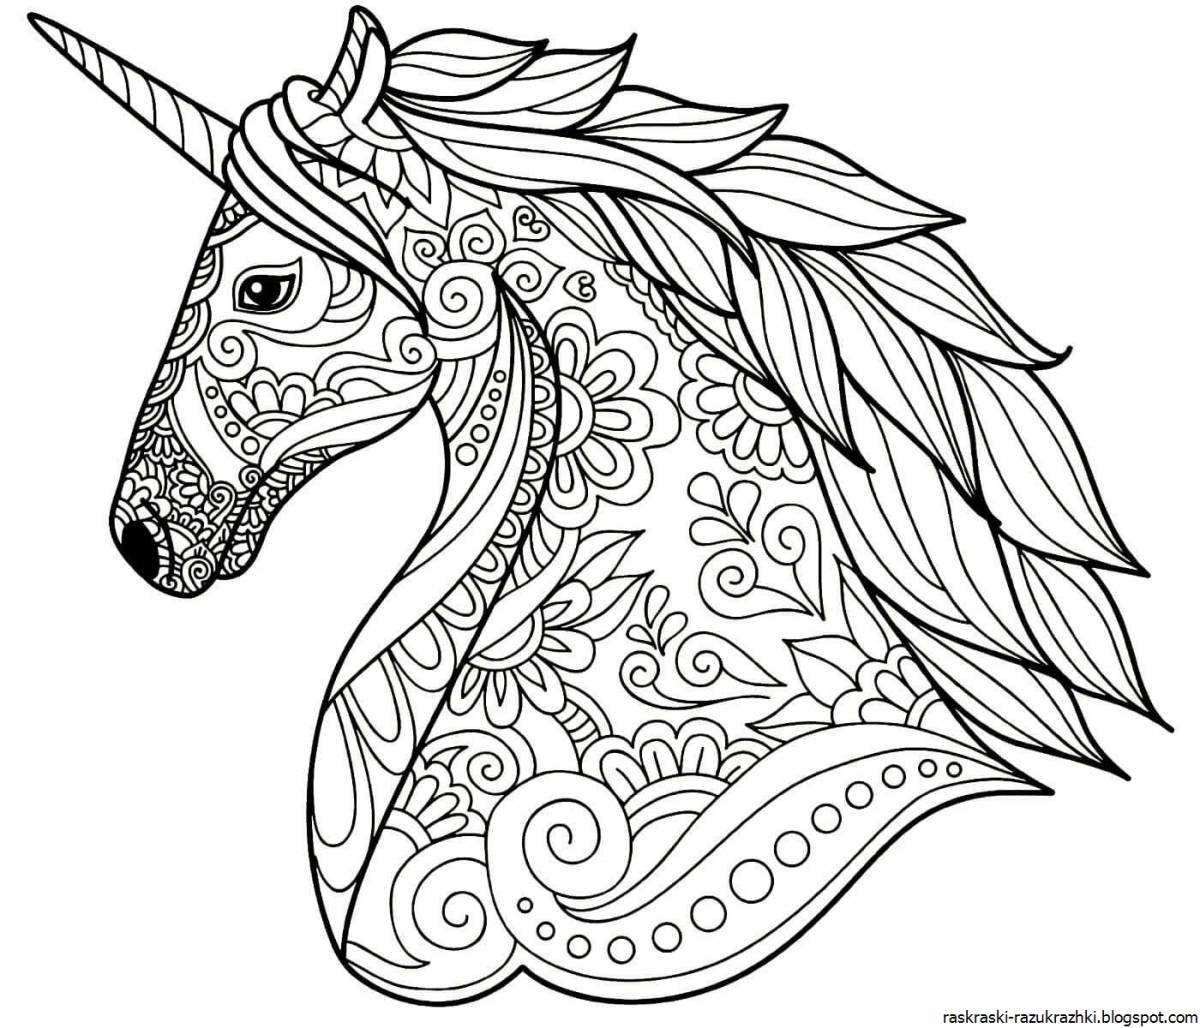 Shiny unicorn coloring pages for girls